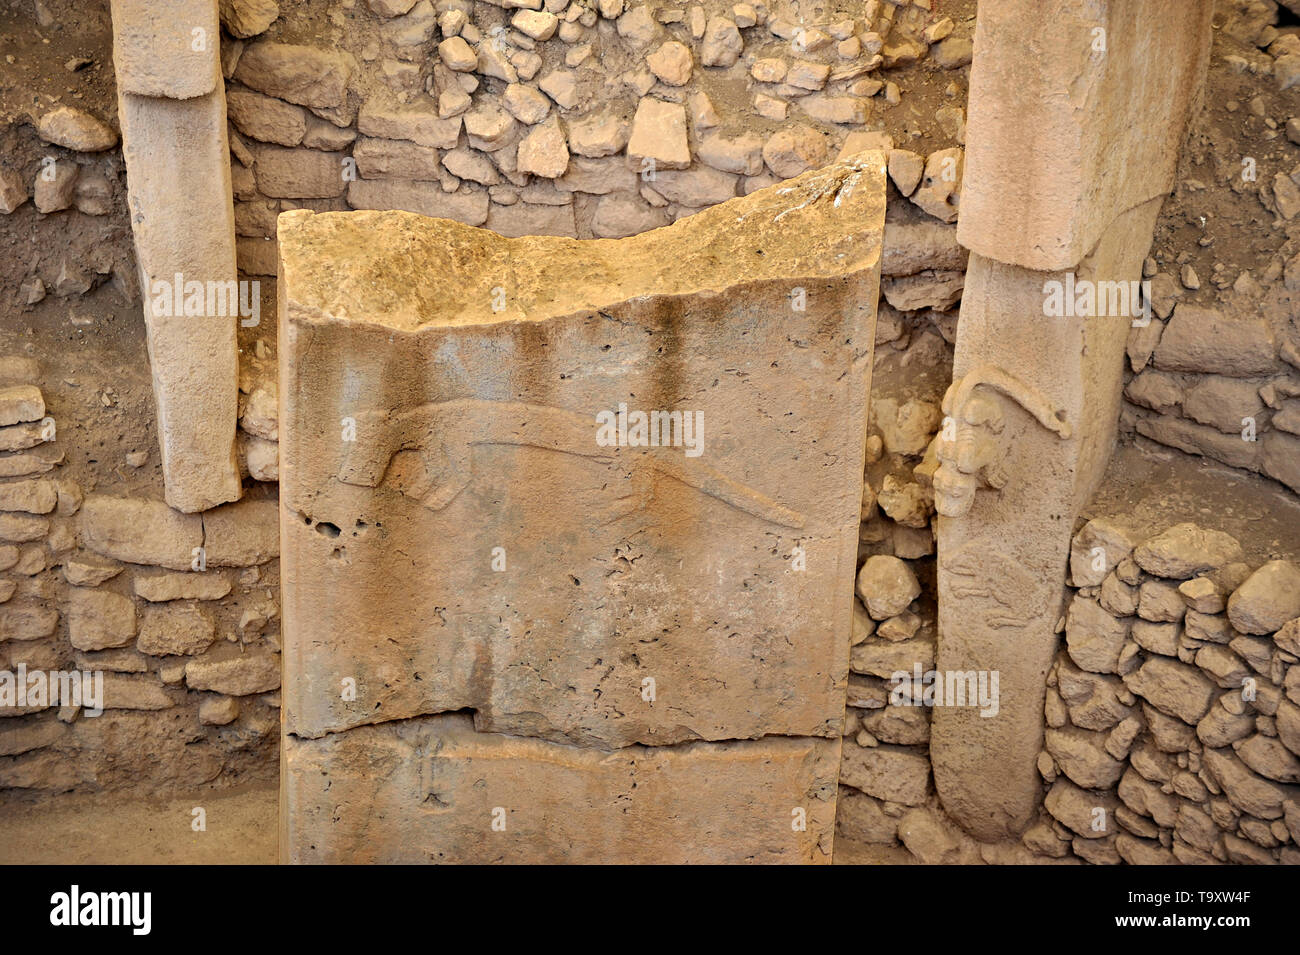 Carved animals at ancient archaeological site in Gobekli Tepe, Sanliurfa, Turkey Stock Photo